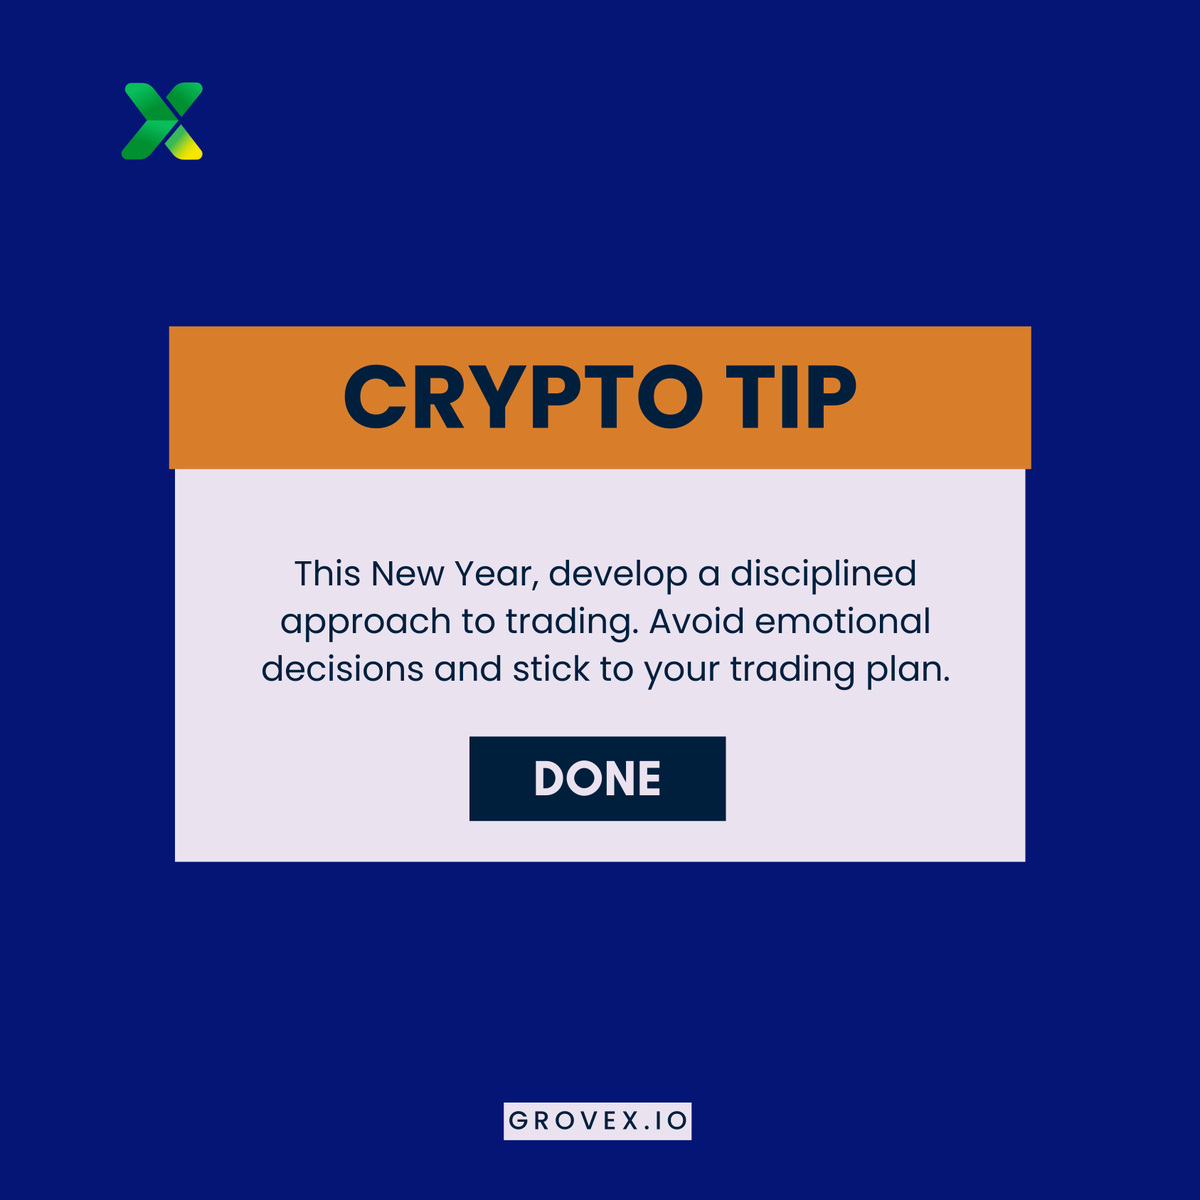 ✨New Year's Resolution: Develop a disciplined approach to trading. Avoid emotional decisions and stick to your plan for smarter investing! ✨
#NewYearsResolution #TradingDiscipline #GroveX #cryptocurrency #Cryptotips